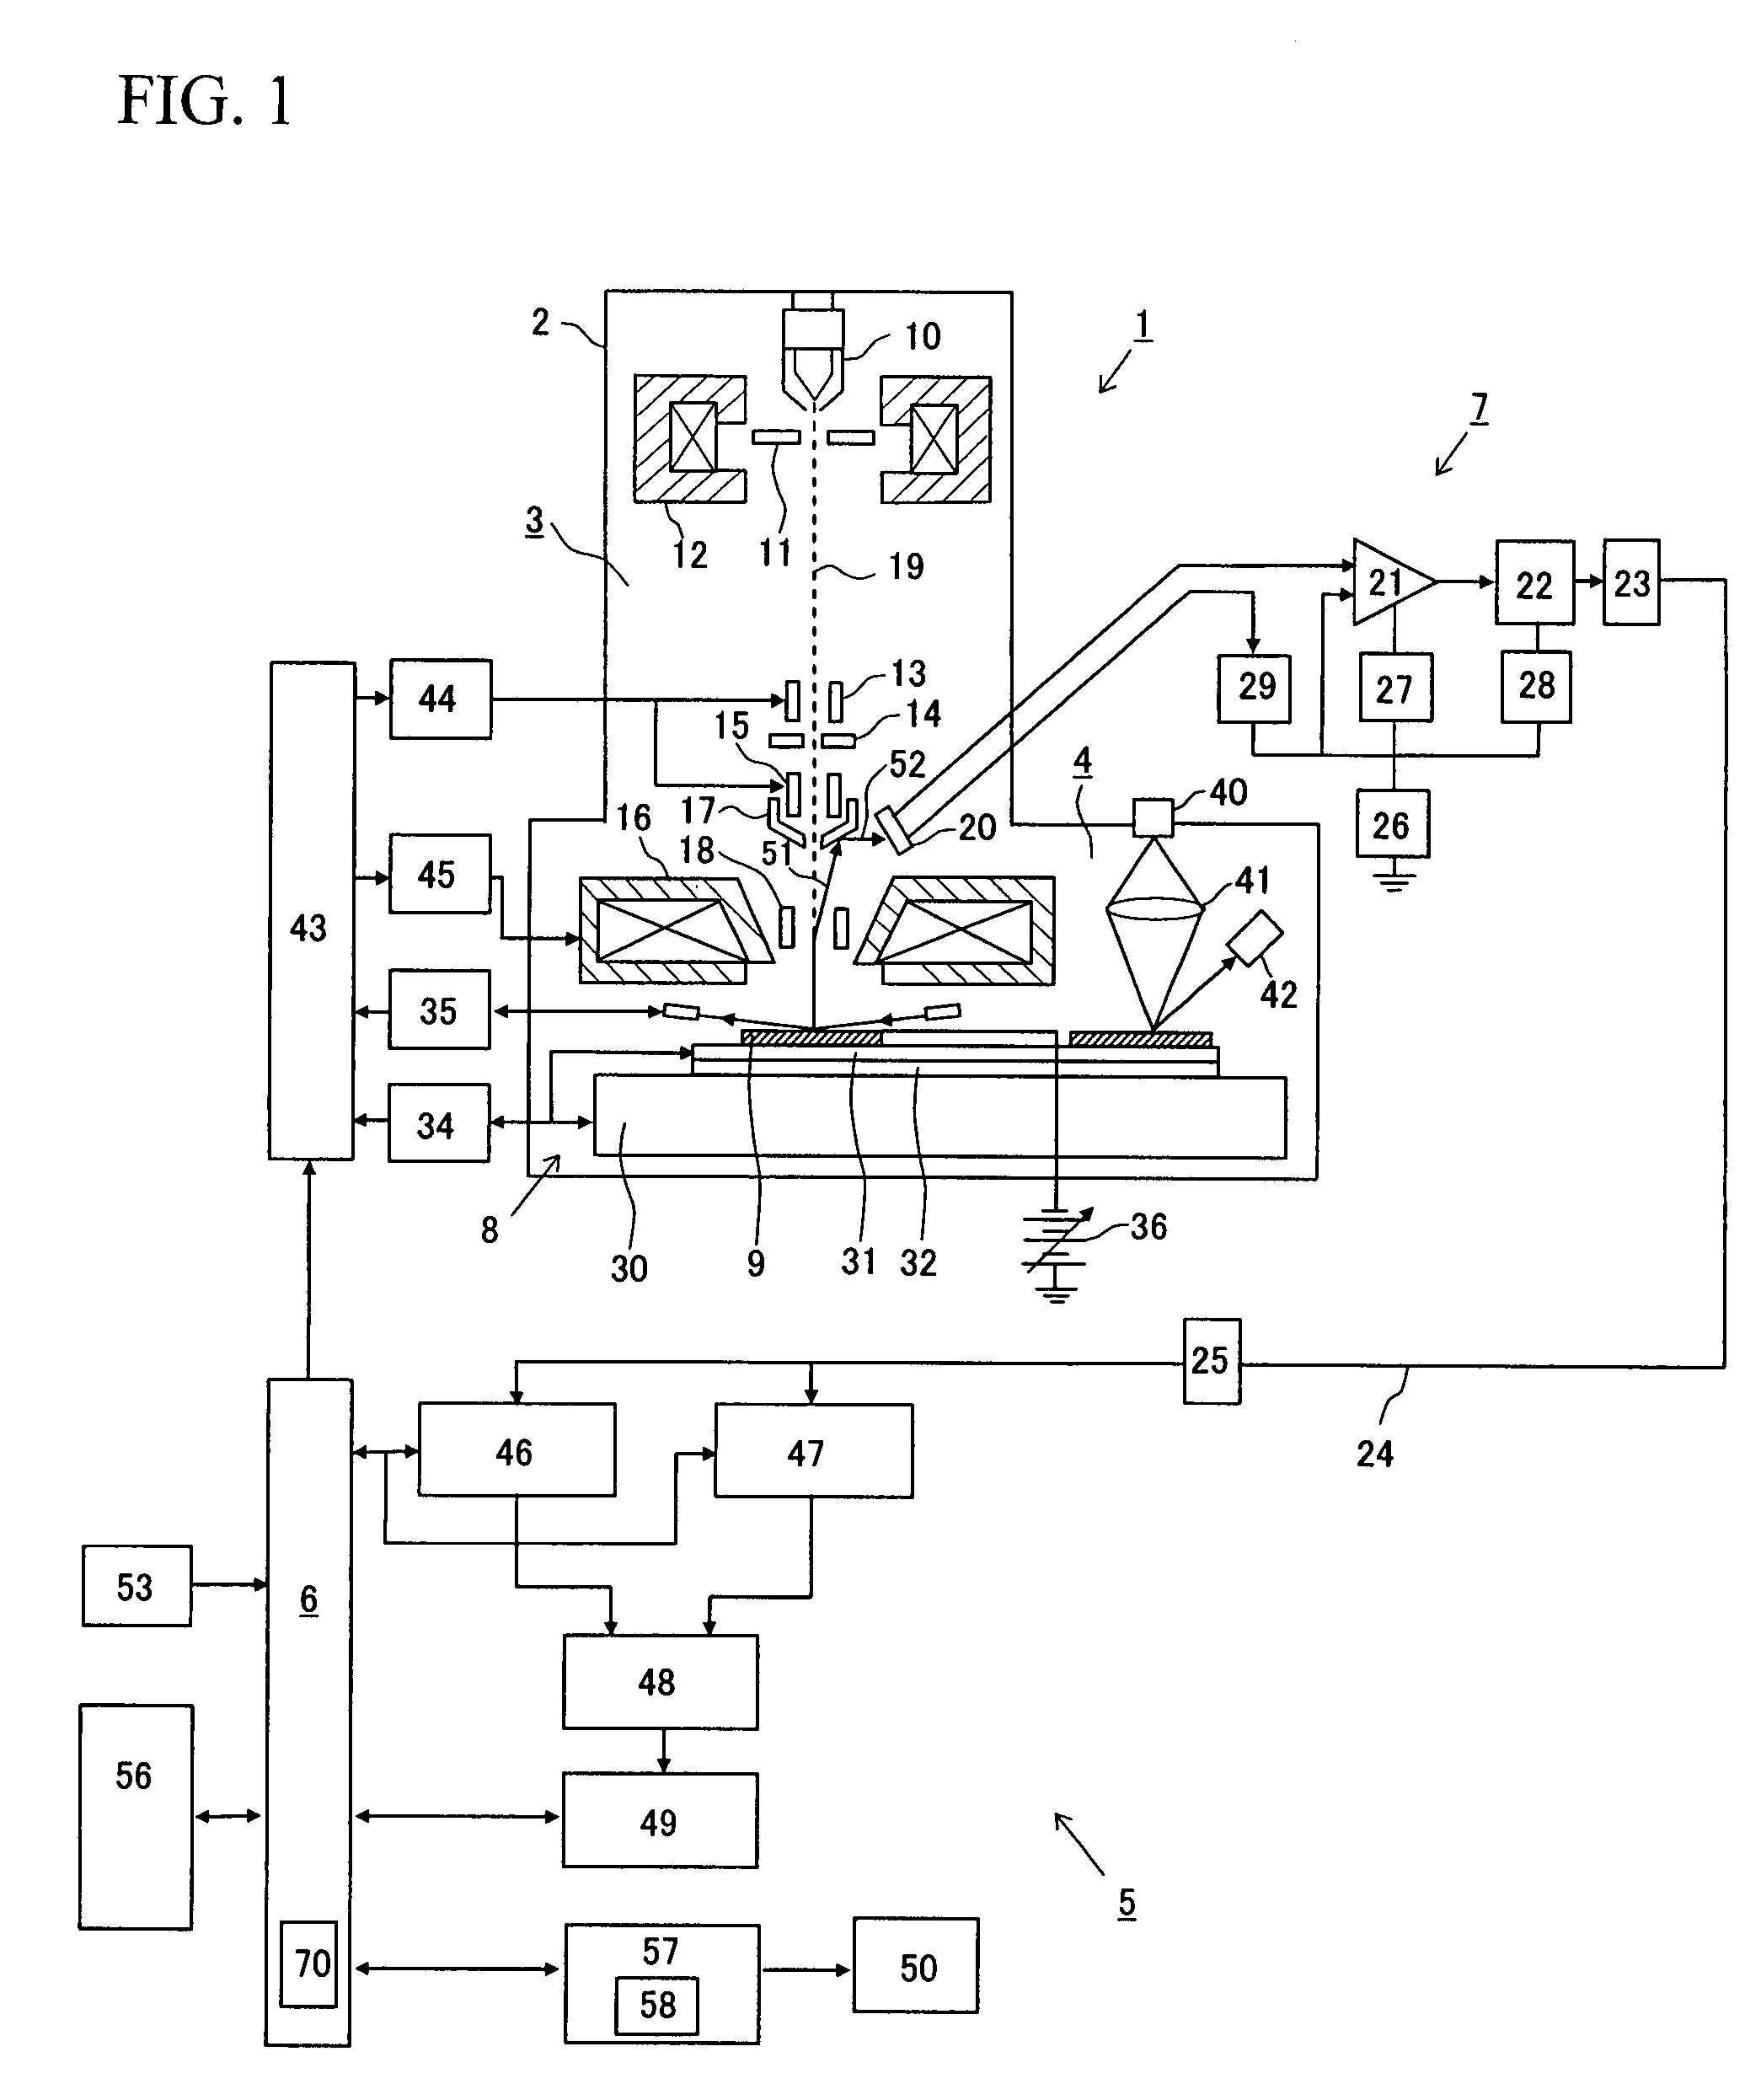 Circuit-pattern inspecting apparatus and method